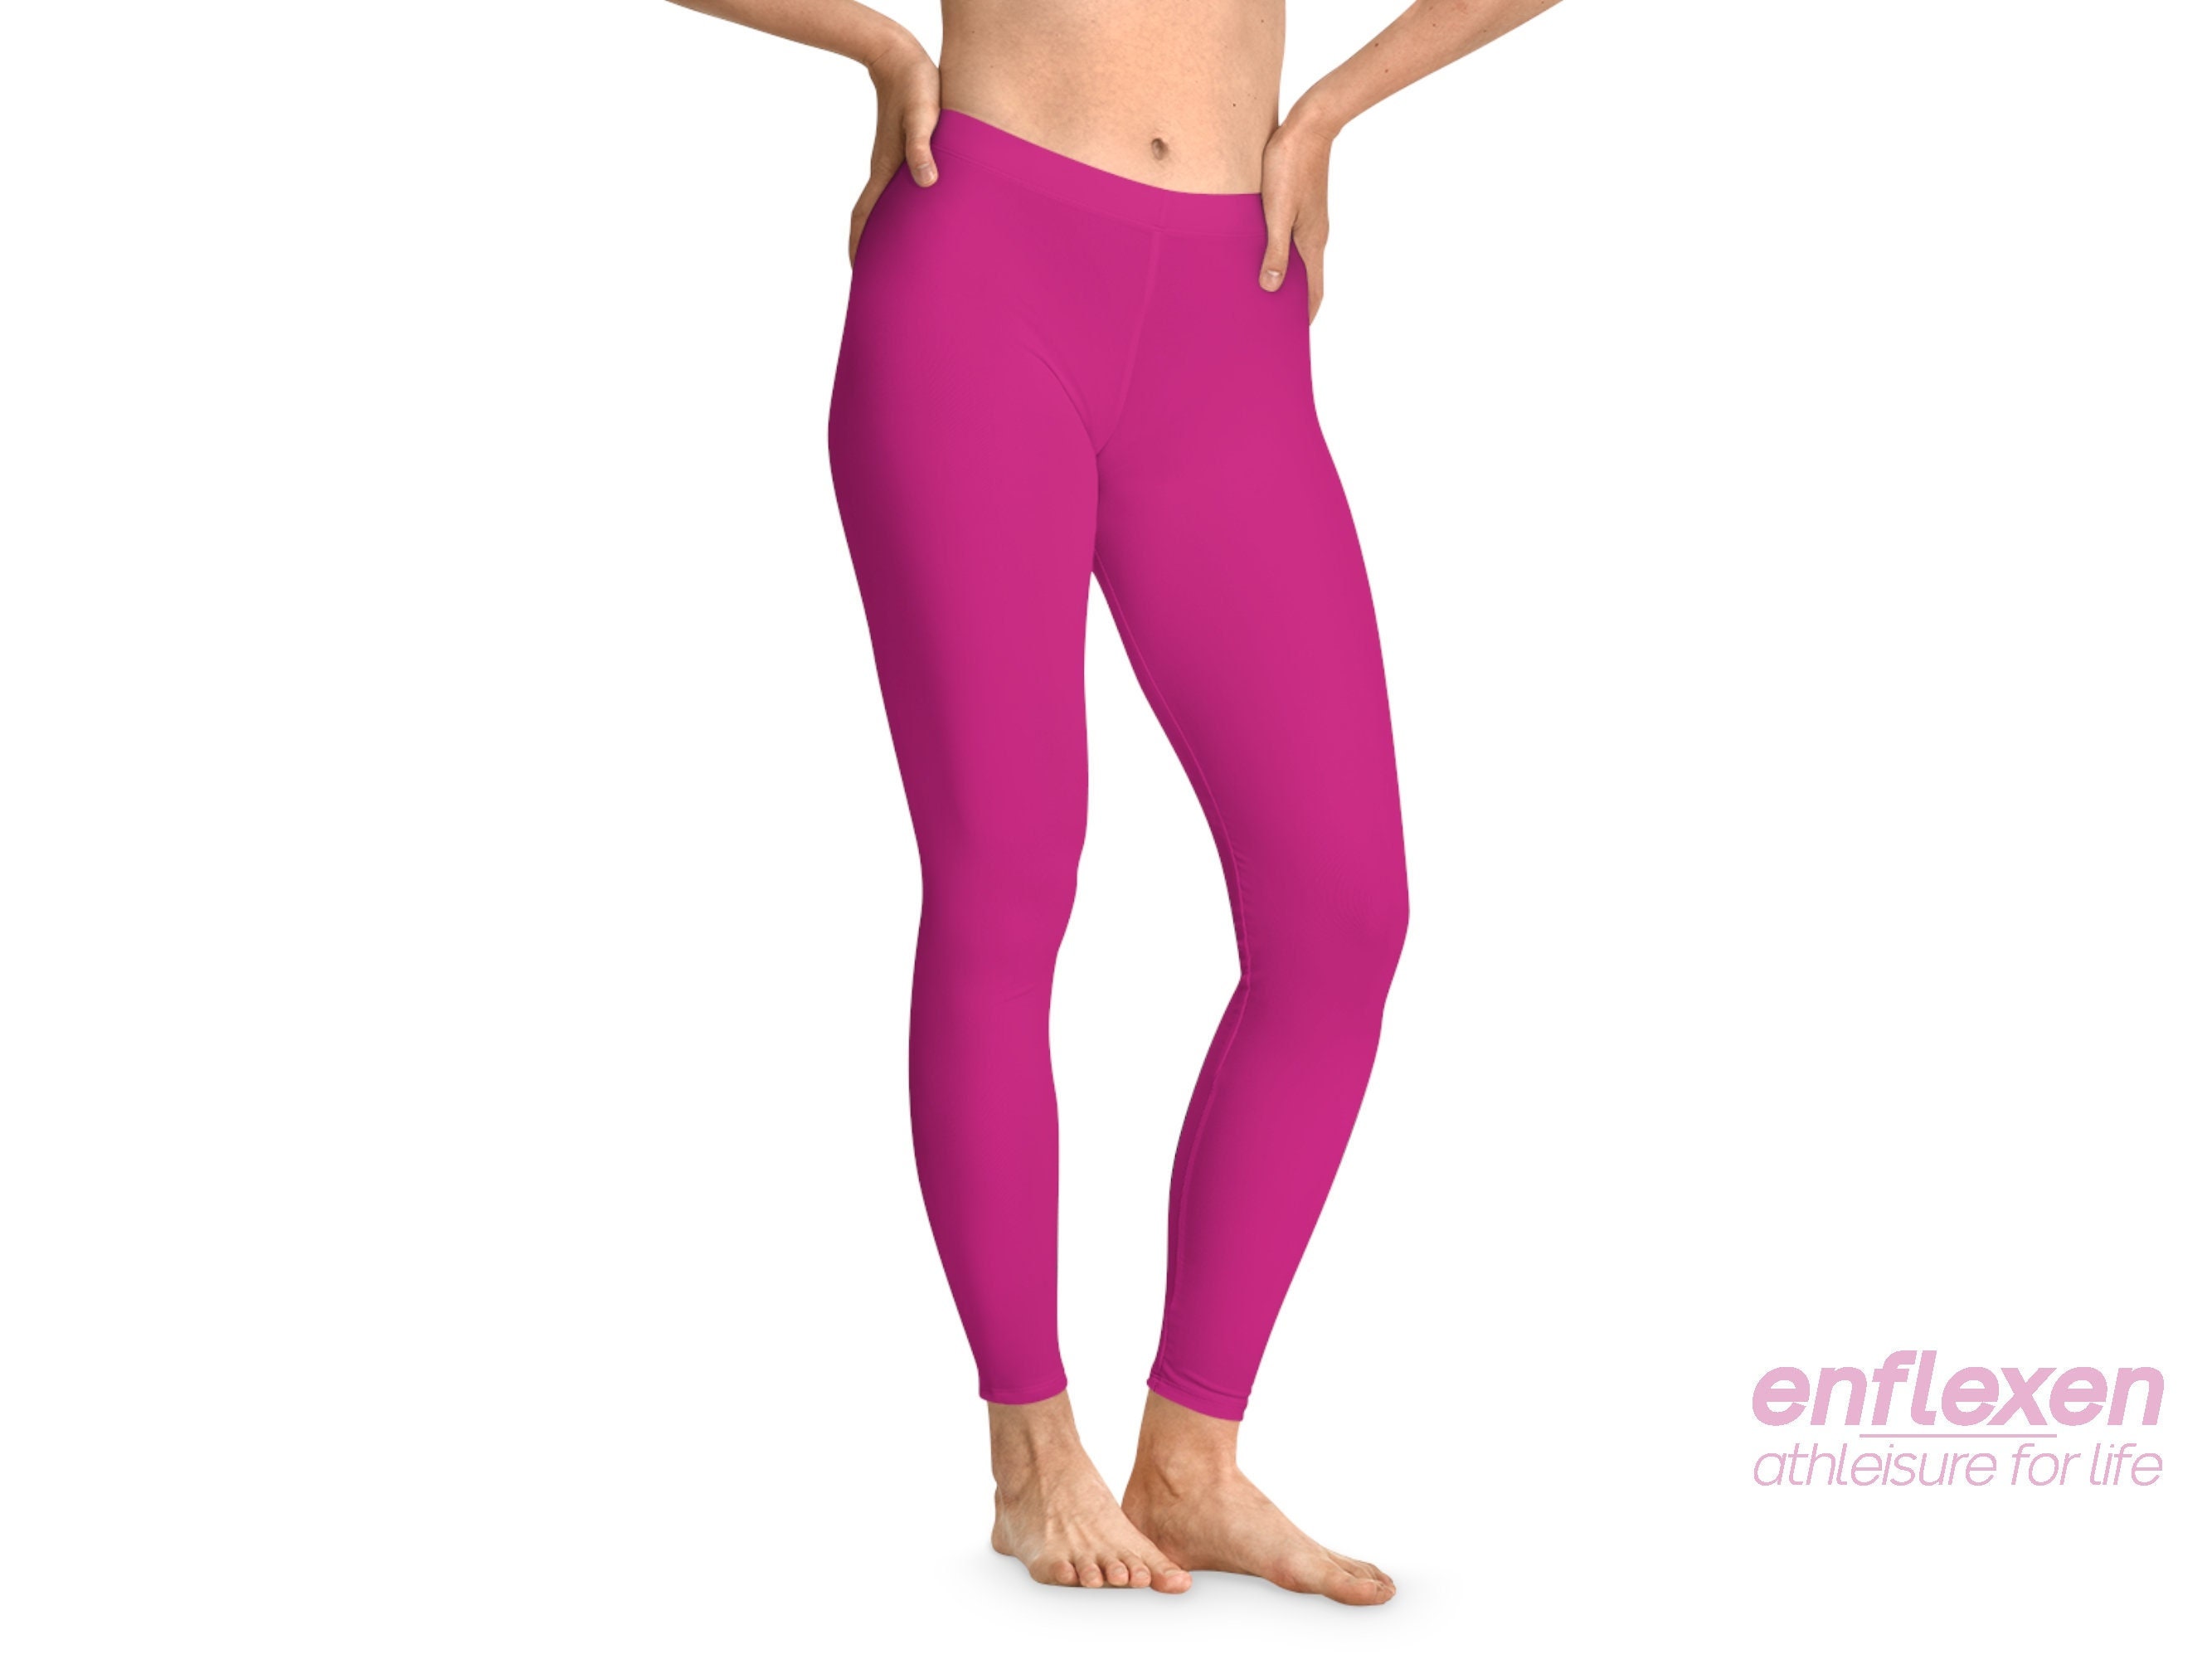 Pink & Blue Yoga Leggings, Fuchsia Pink and Sky Blue Ombré Gradient, Soft  High Waist UPF Stretch Pants, Dance Gym Fitness Athleisure Tights -   Canada